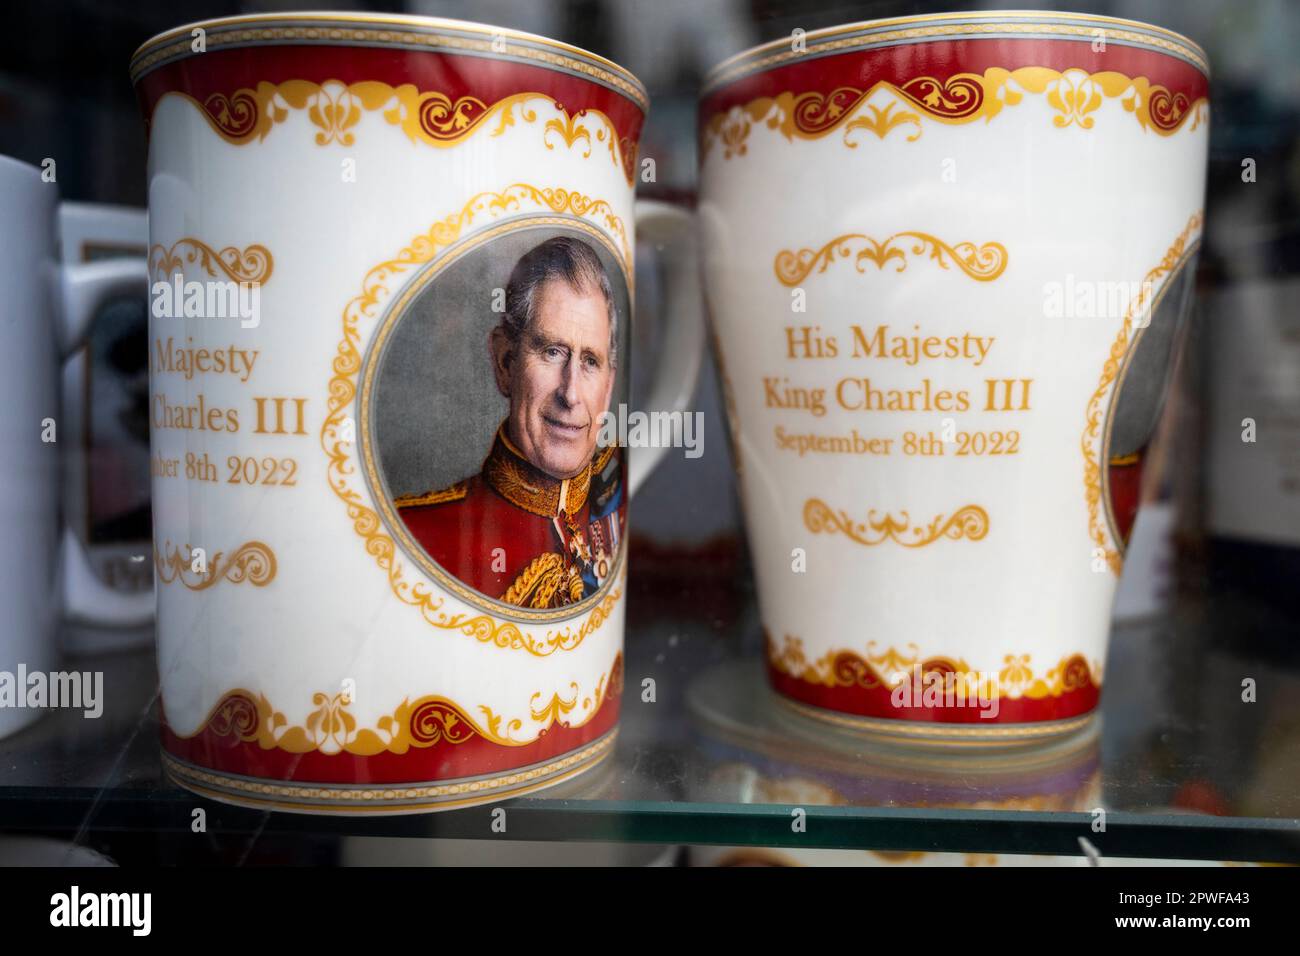 London, UK.  30 April 2023.  Royal memorabilia, including King Charles mugs bearing the date September 8th 2022, the day Queen Elizabeth II died, seen in the window of a souvenir shop in Paddington ahead of the coronation of King Charles III on 6 May.  Credit: Stephen Chung / Alamy Live News Stock Photo